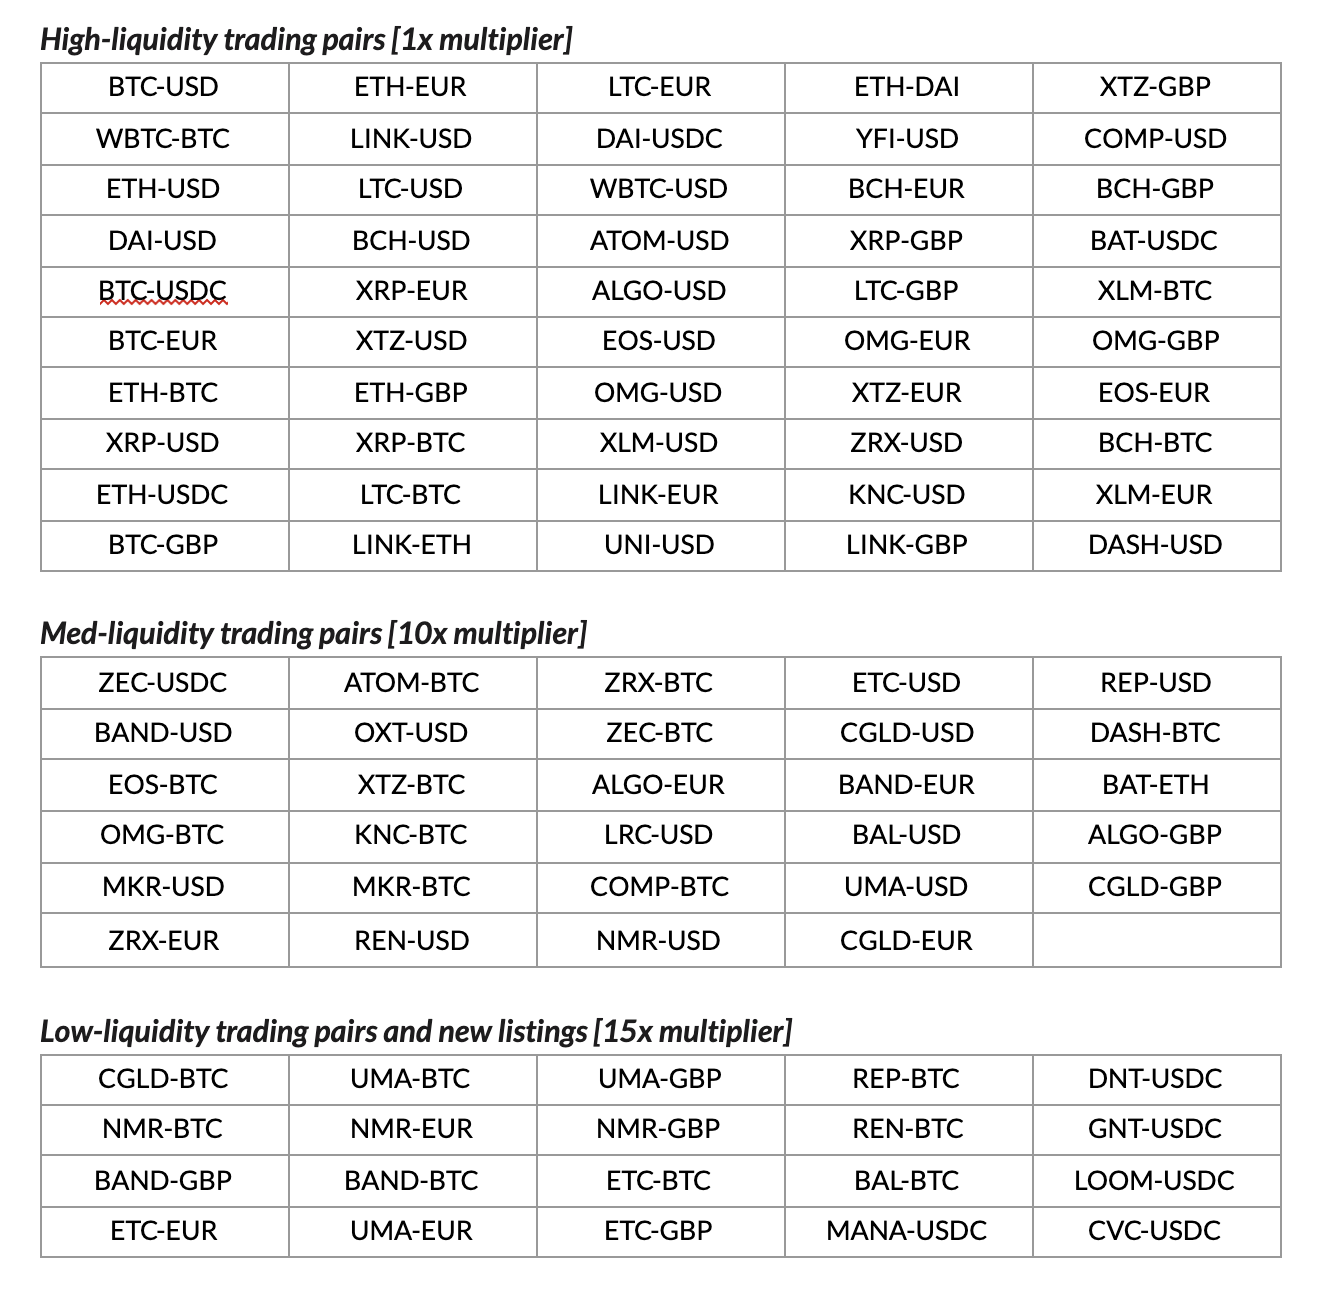 Low-liquidity trading pairs and new listings